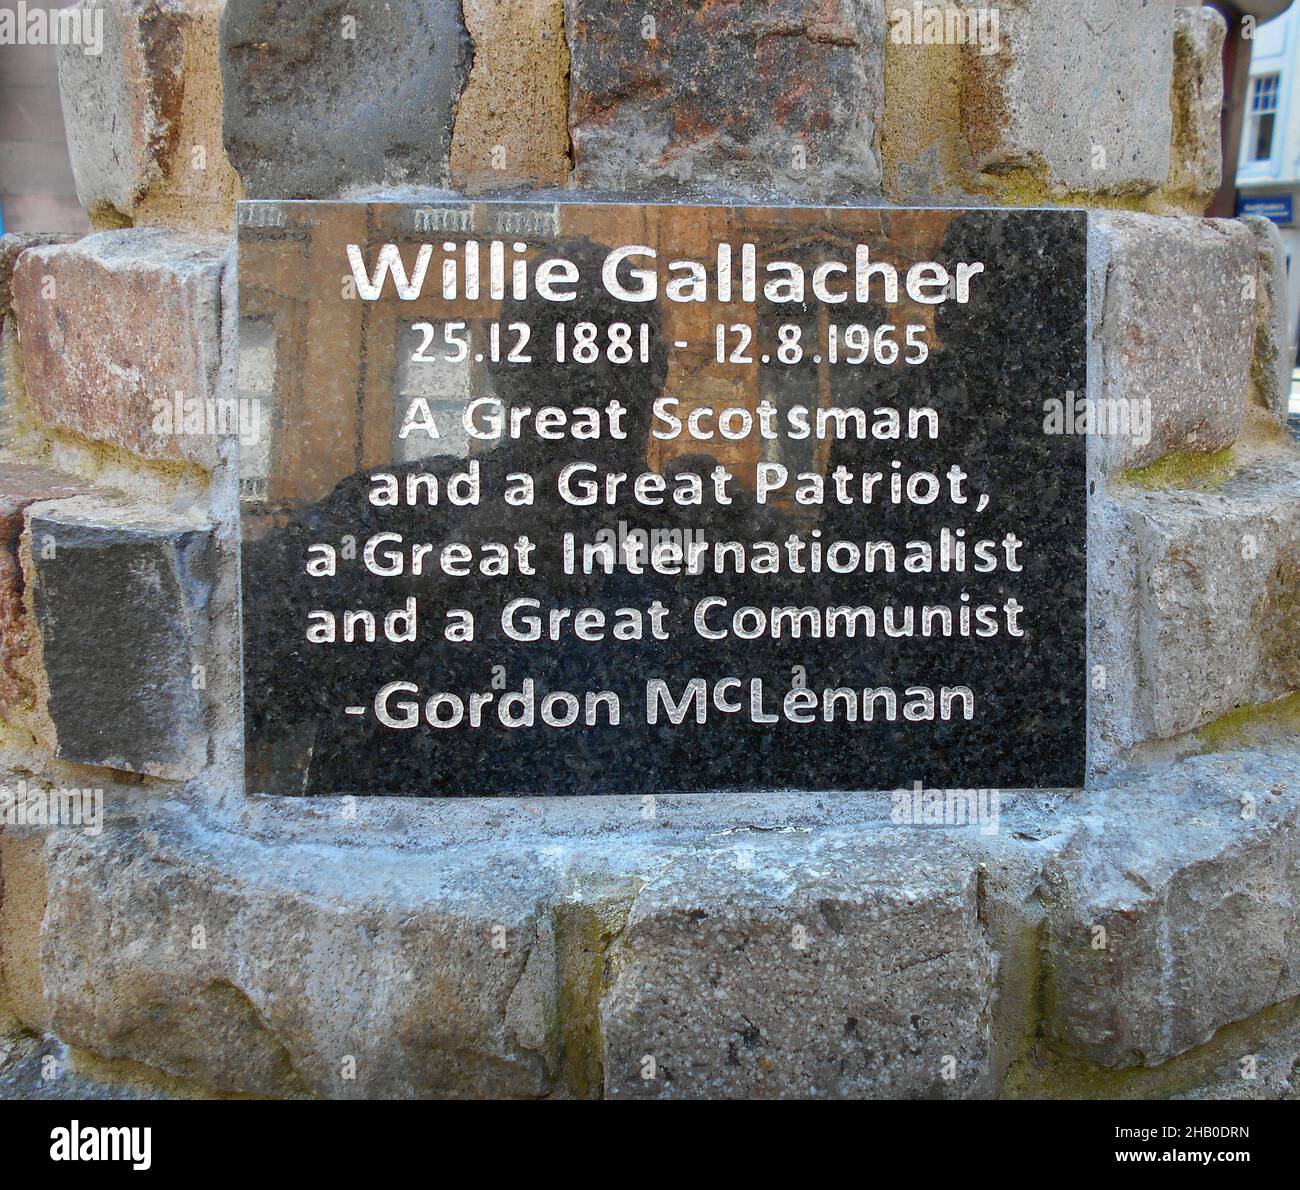 A memorial stone stands in the town of Paisley, near Glasgow, to commemorates the life of Willie Gallagher who was a Scottish, Communist MP and a great politician.  ALAN WYLIE/©ALAMY Stock Photo